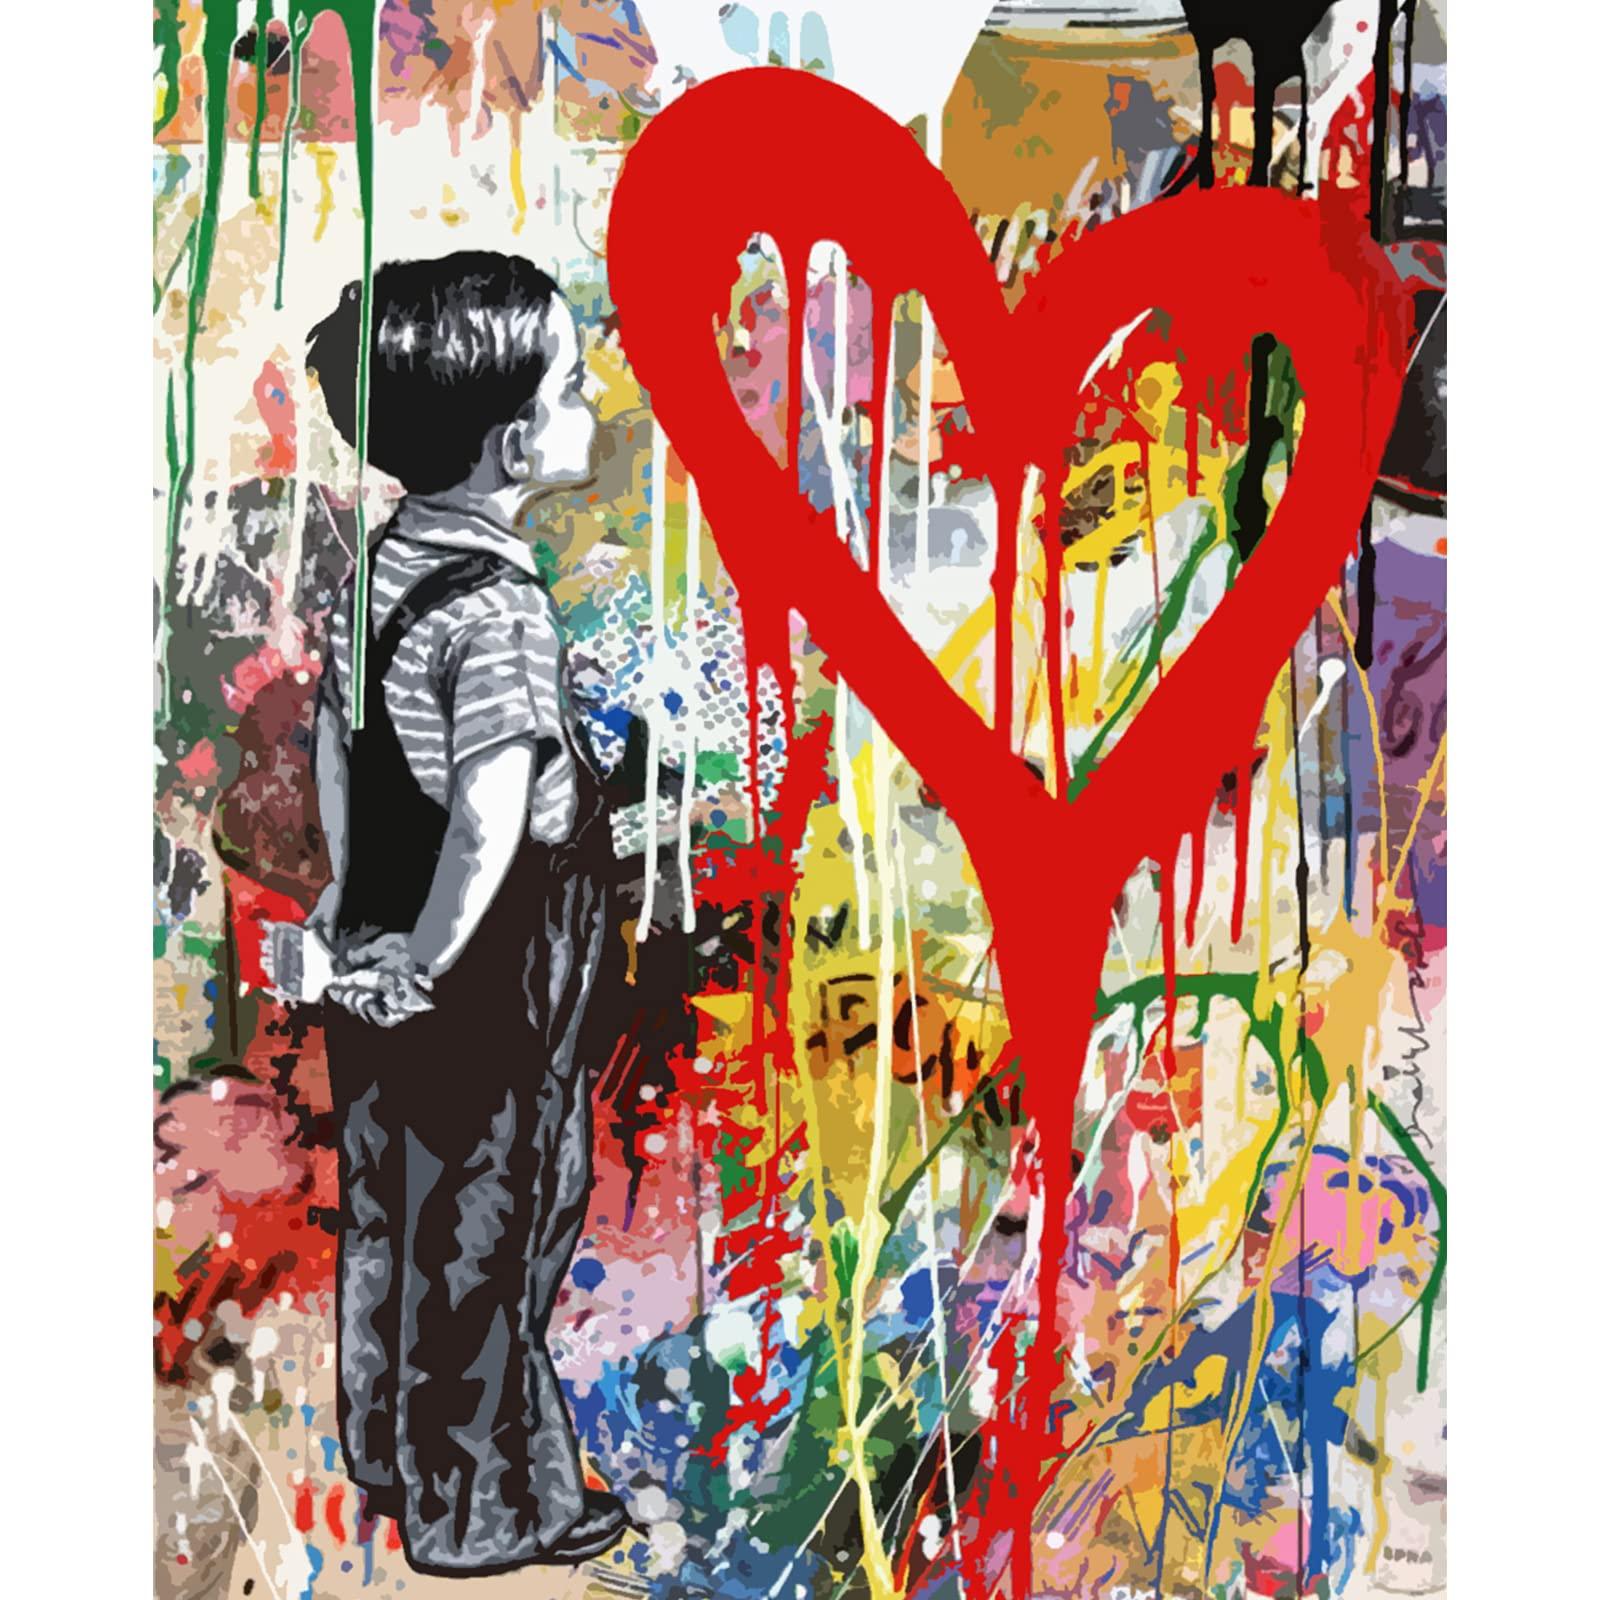 Tucocoo Banksy Street Graffiti Oil Painting Paint by Number Kits 16 x 20 inch Canvas DIY Oil Painting for Kids Students Adults Beginner with Brushes and Acrylic Pigment(Without Frame)